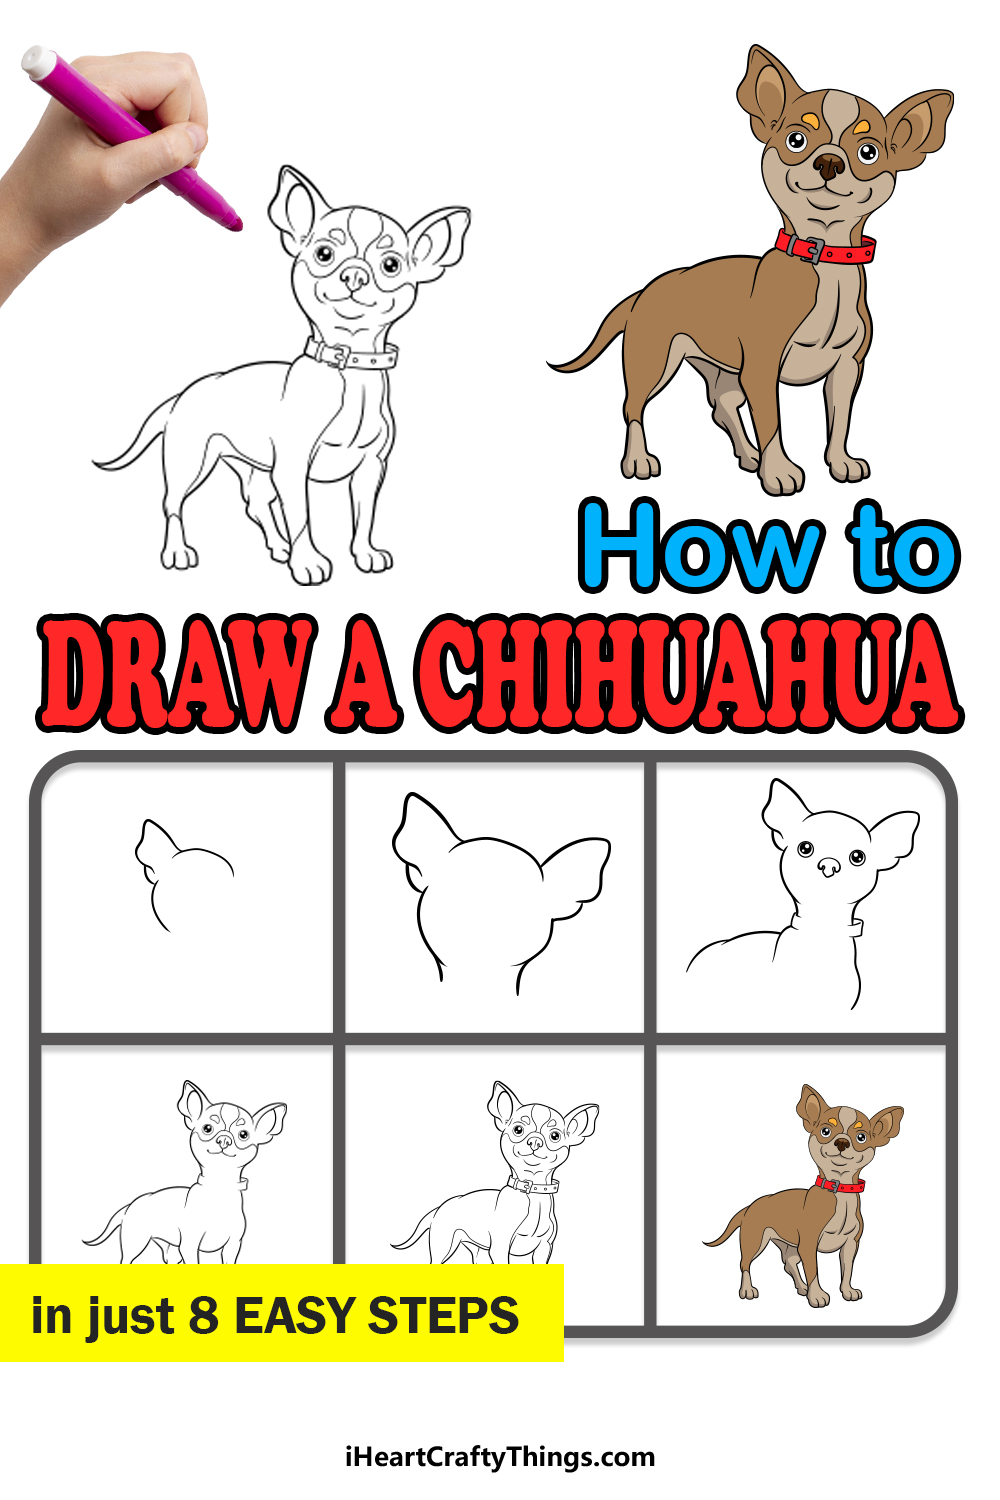 how to draw a chihuahua in 8 easy steps